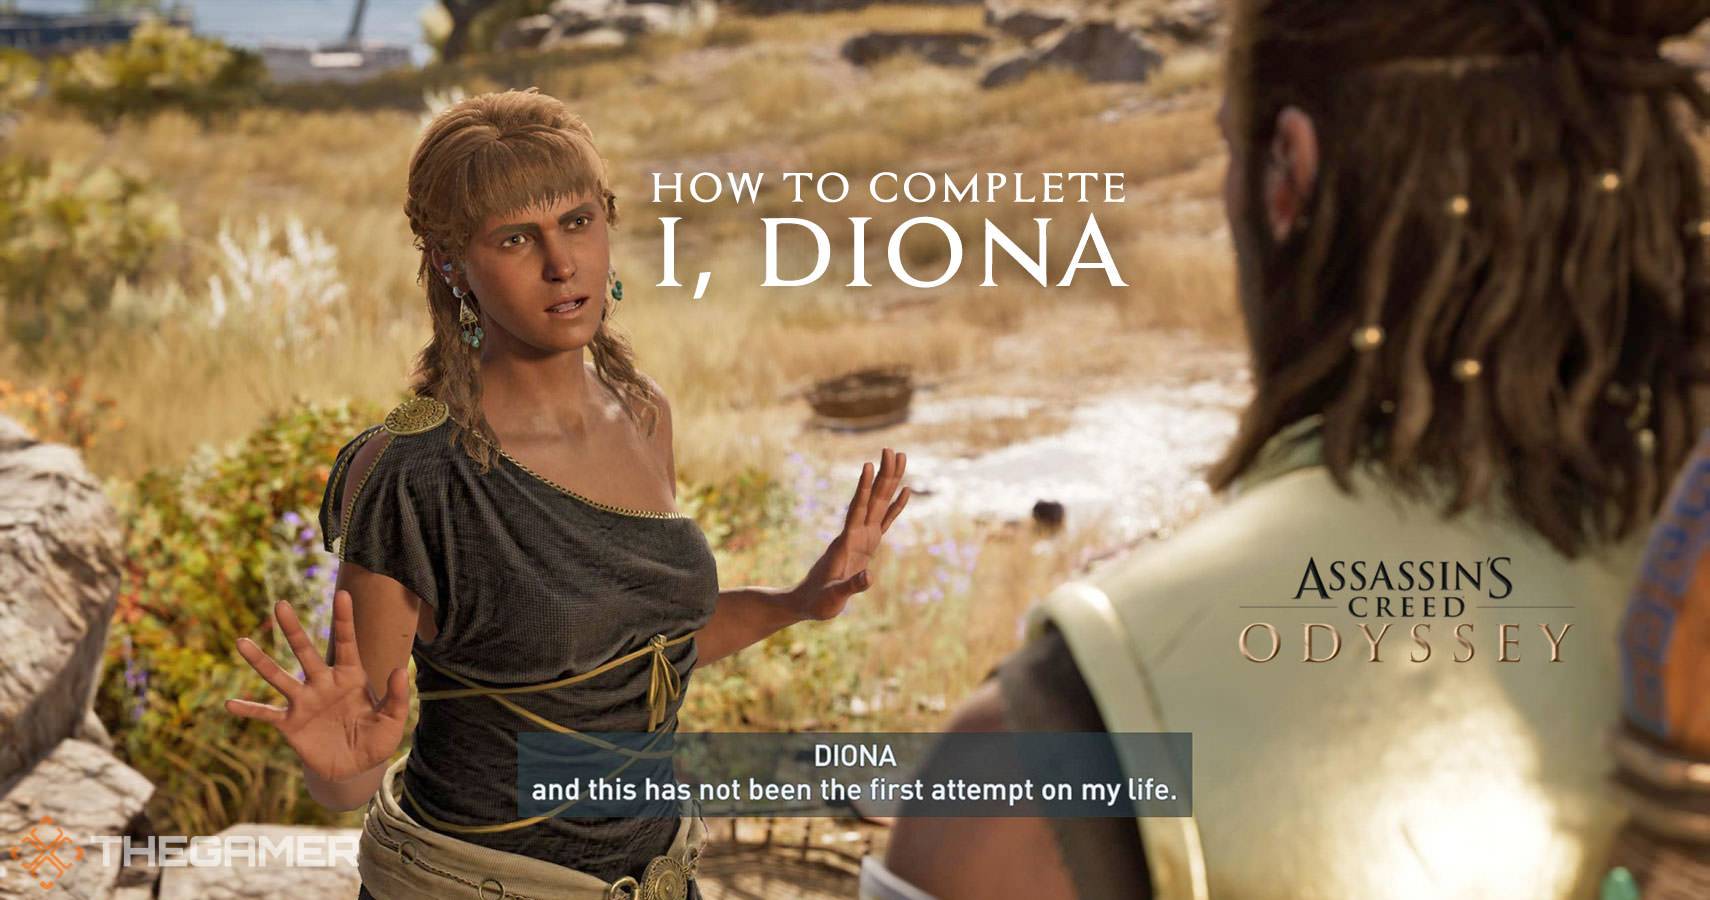 Ac odyssey diona right or left